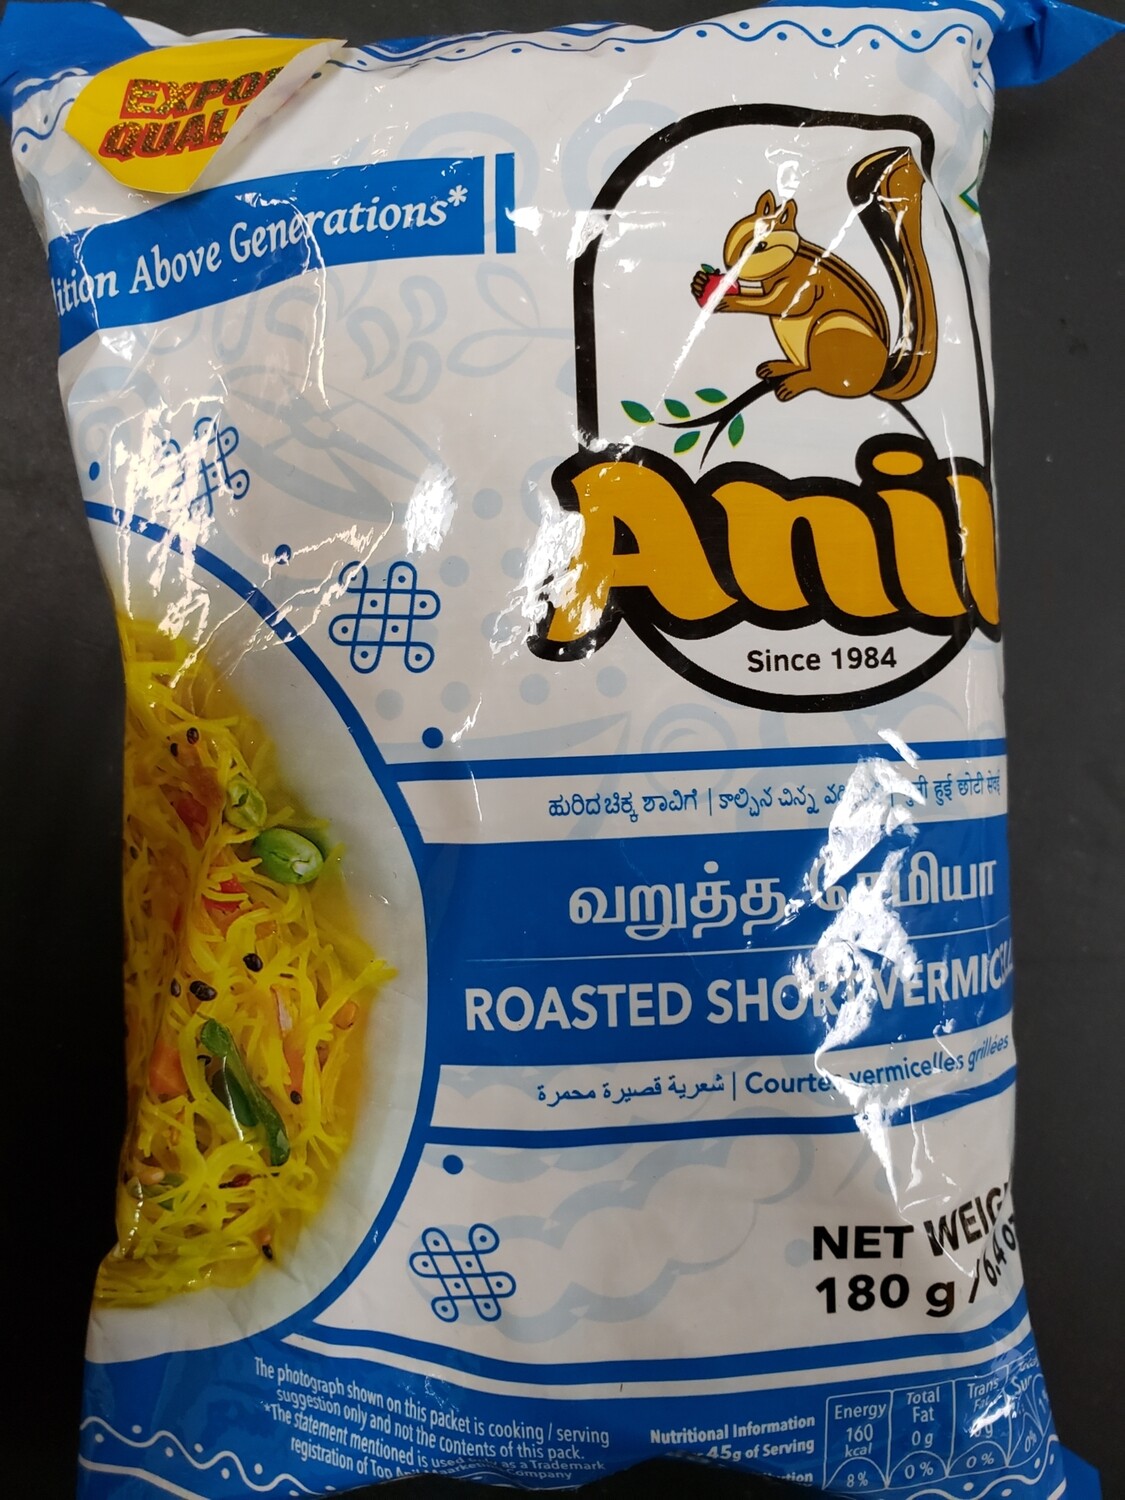 Anil Roasted Short Vermicelli 180g